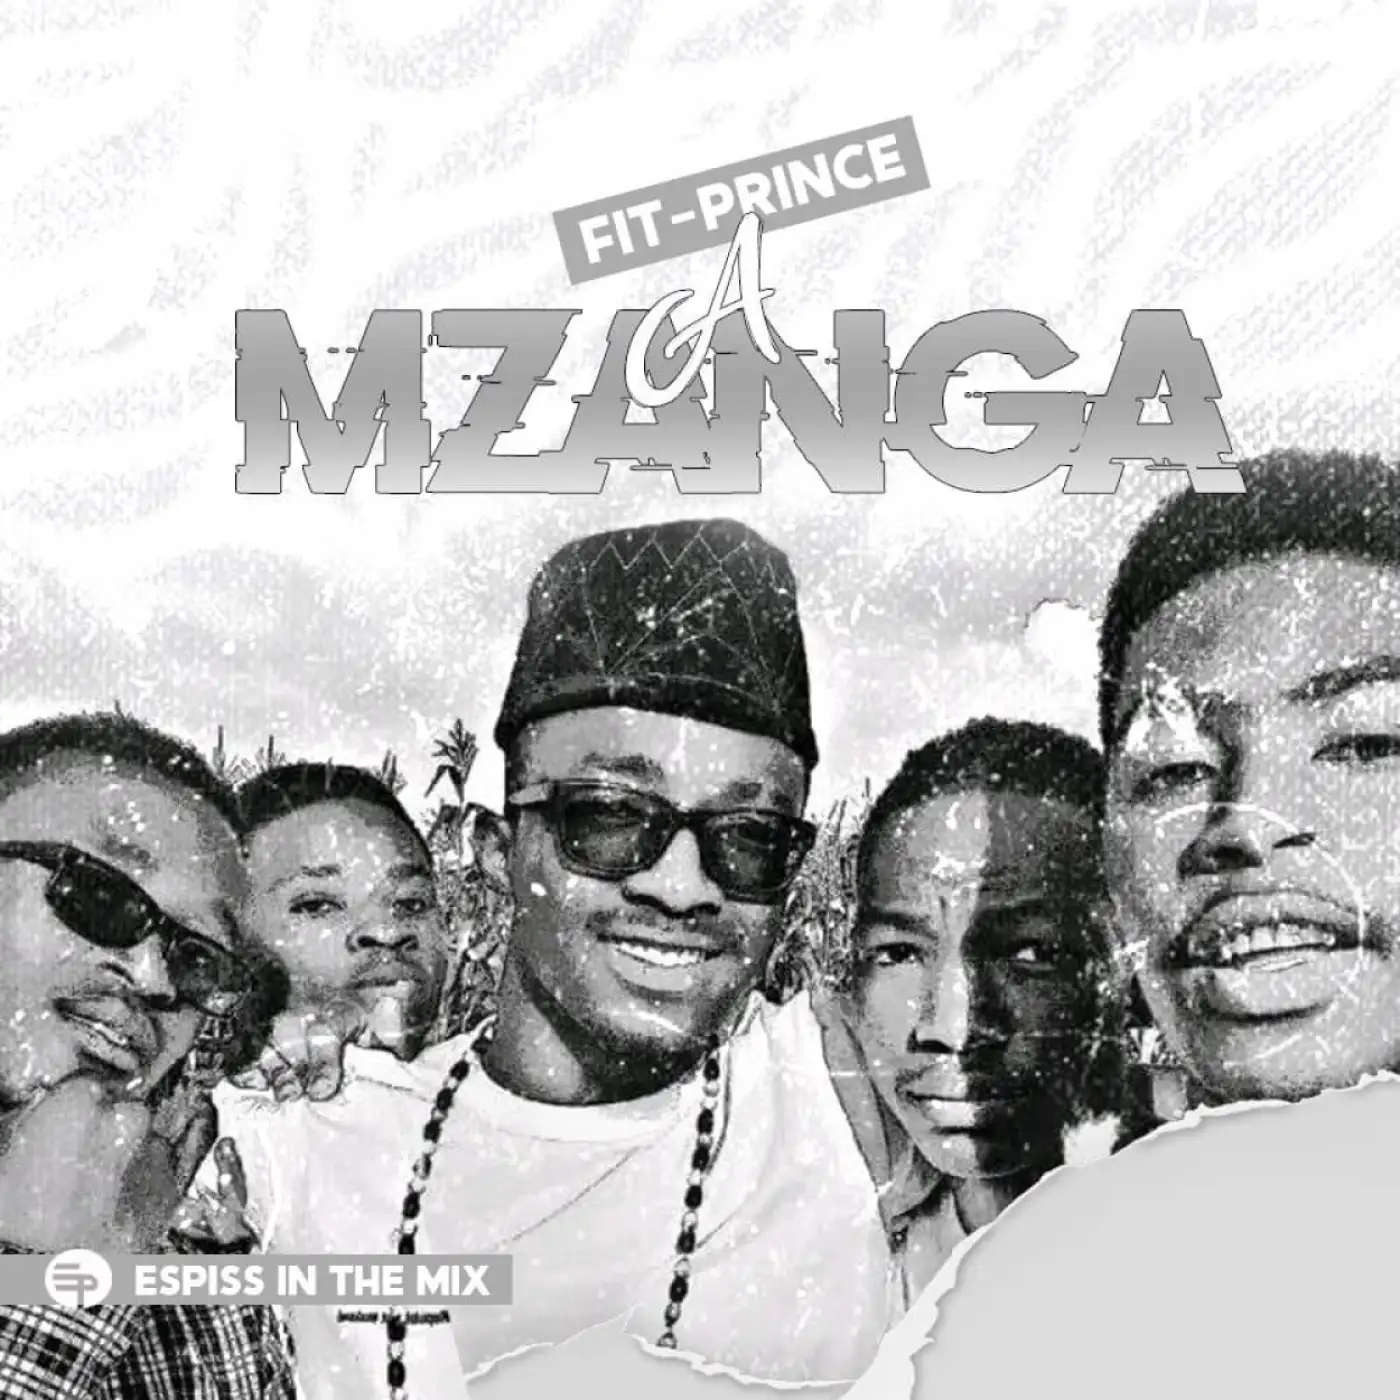 Fit Prince-Fit Prince - Amzanga (Prod. Espiss)-song artwork cover